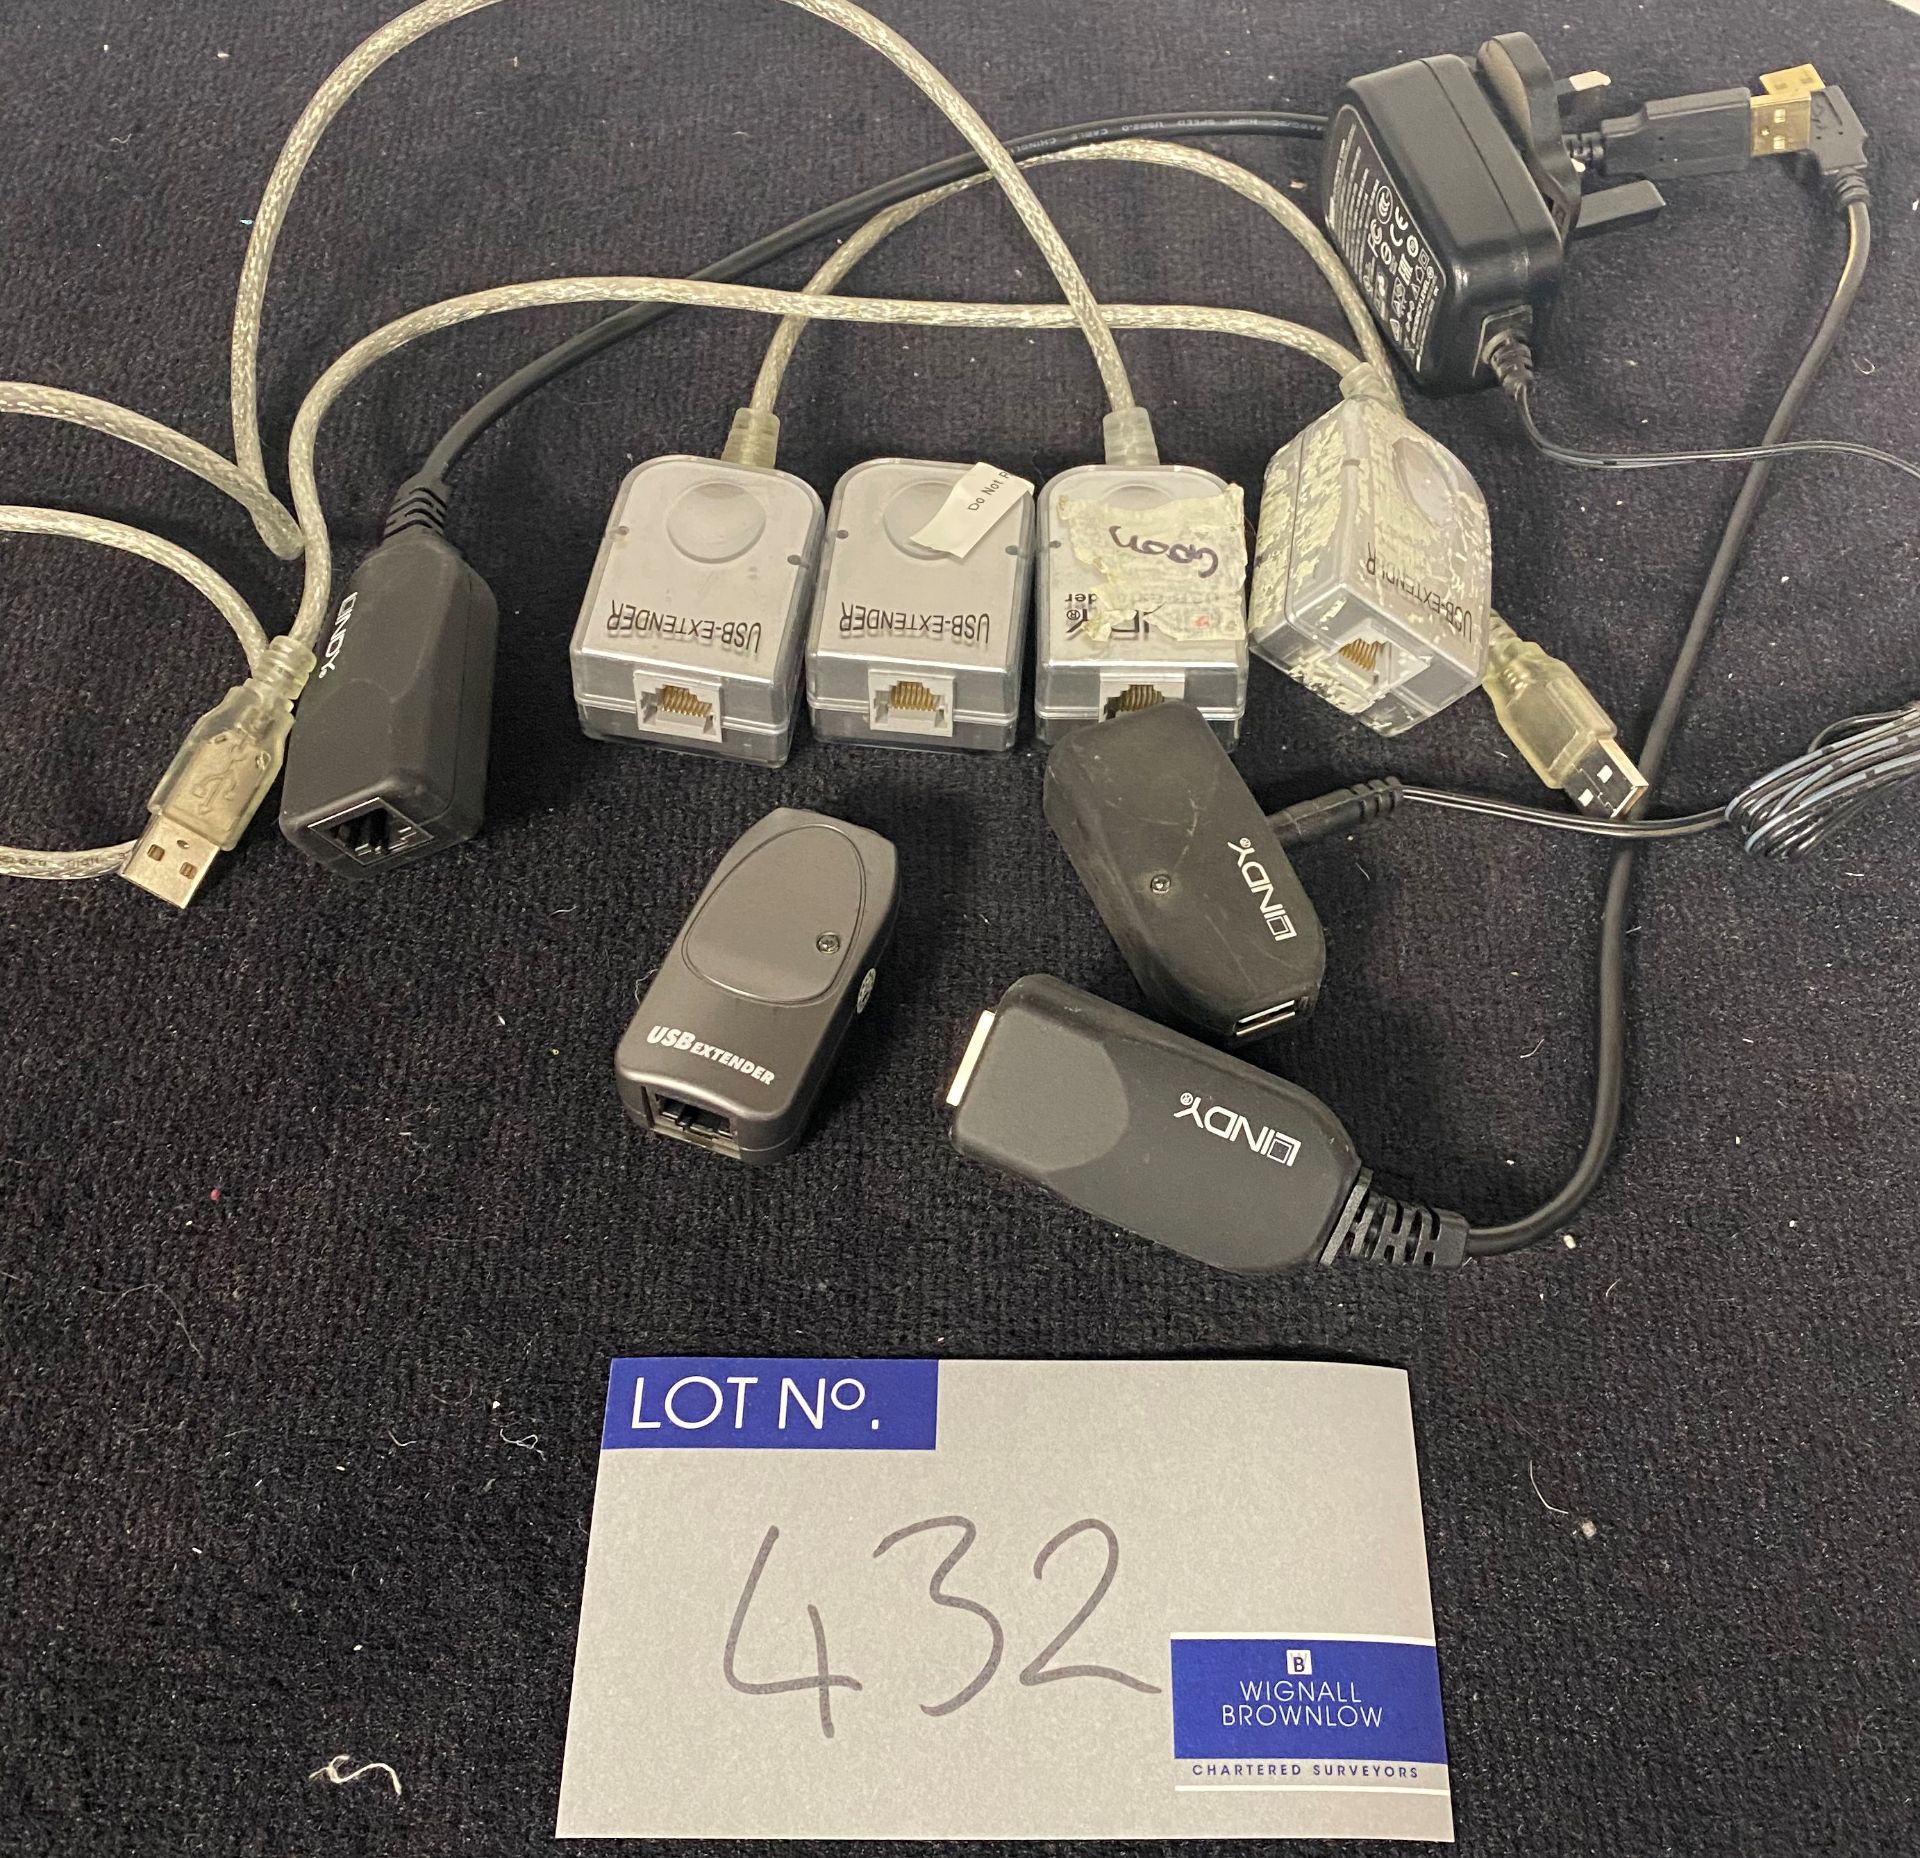 Approx. 8 USB Extenders (not tested).